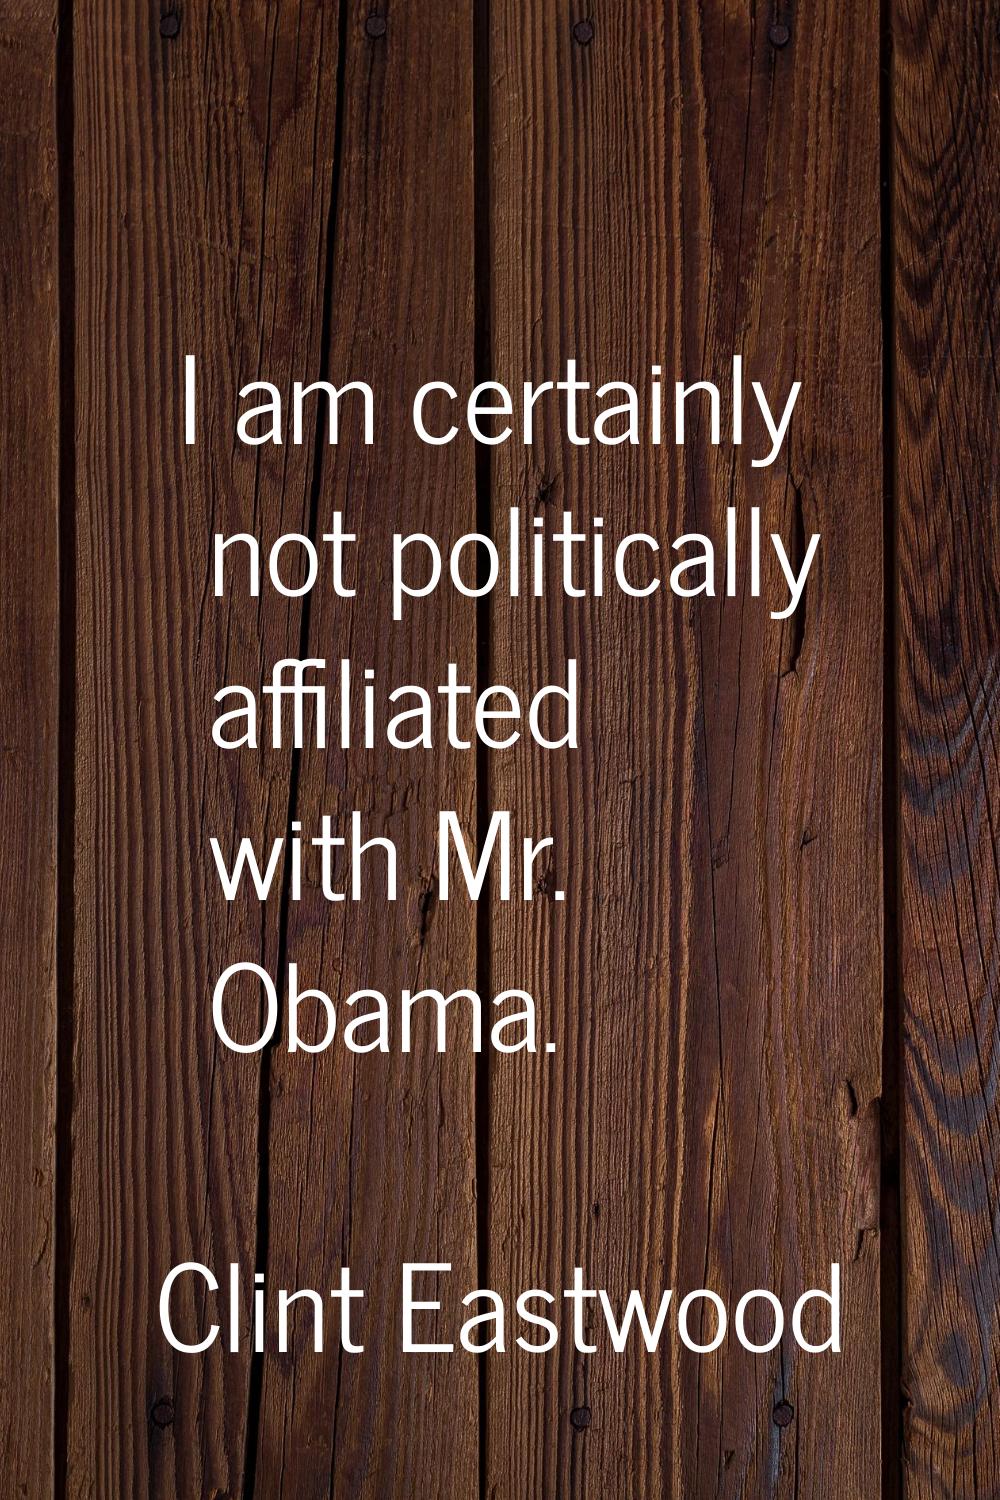 I am certainly not politically affiliated with Mr. Obama.